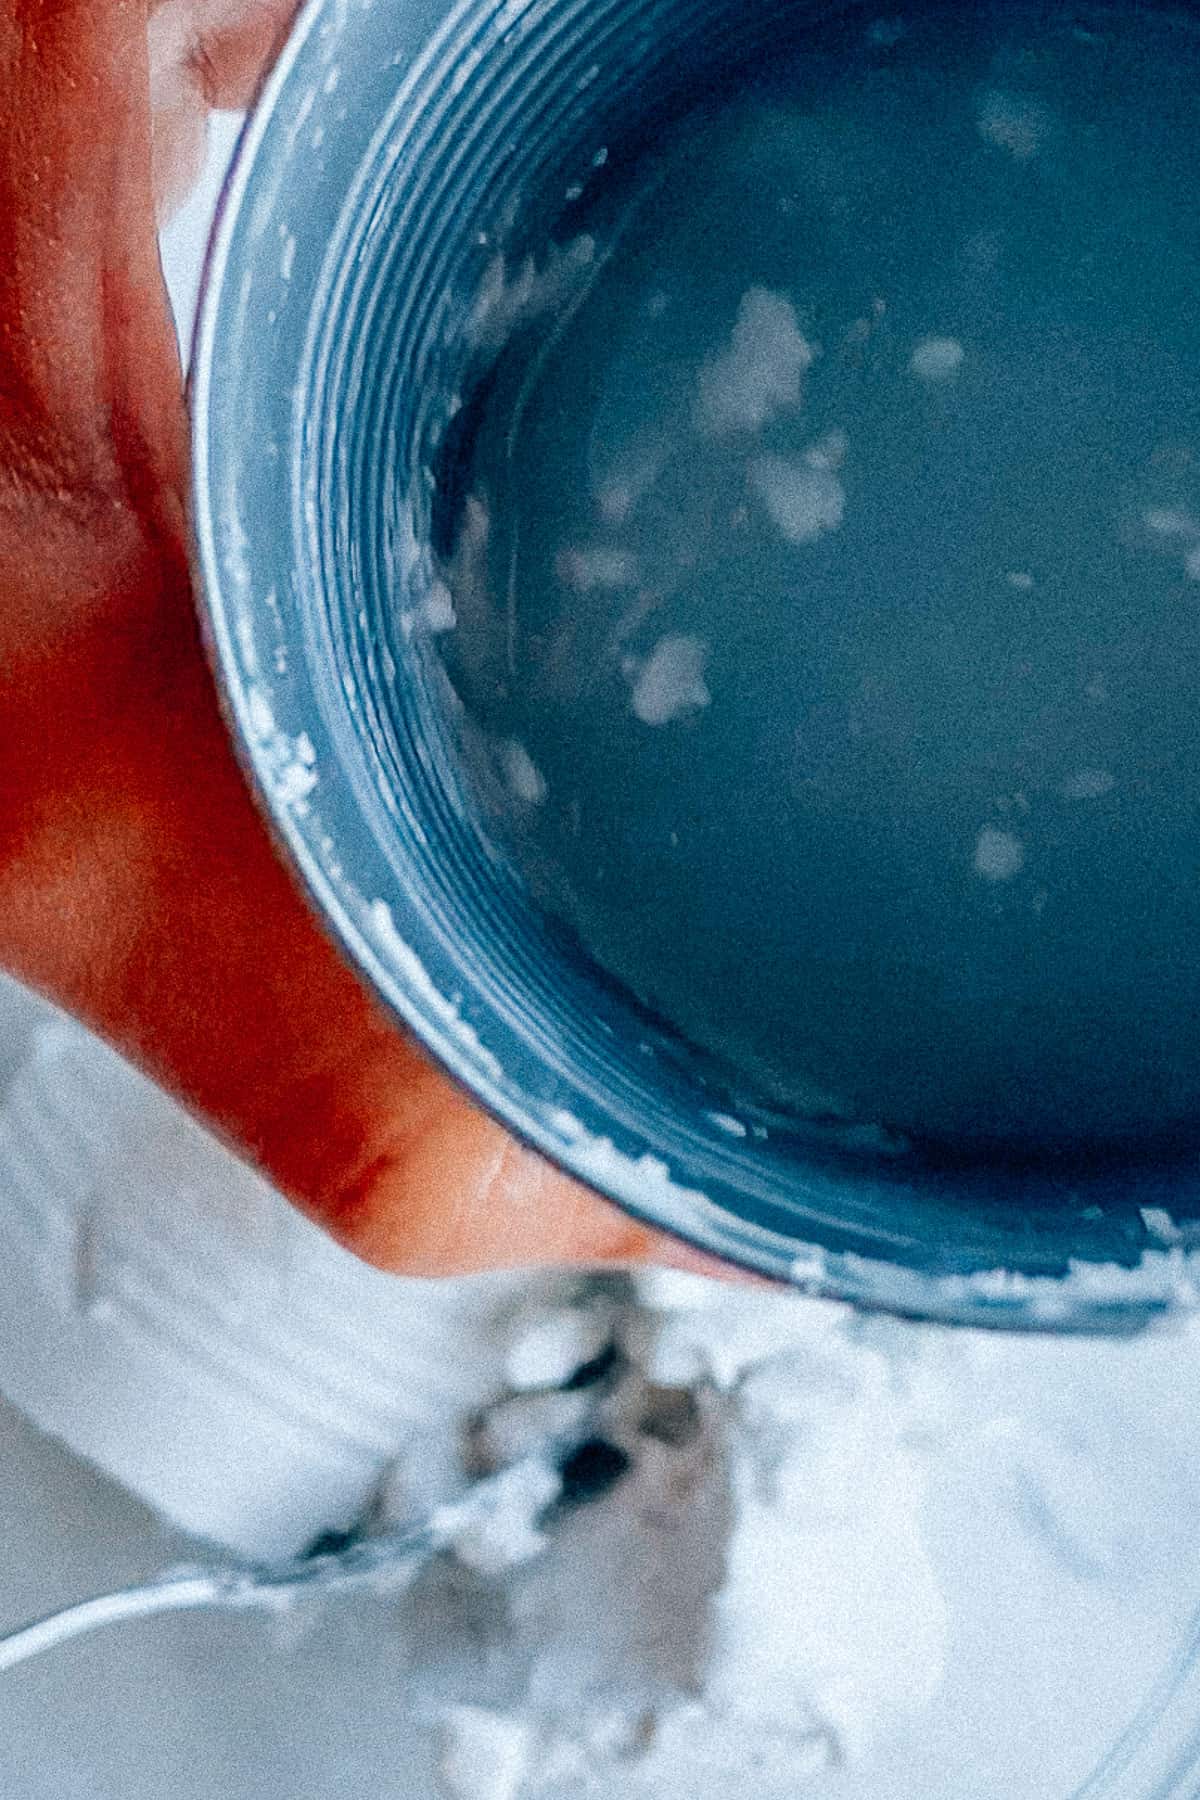 leftover coconut water from a can of coconut cream